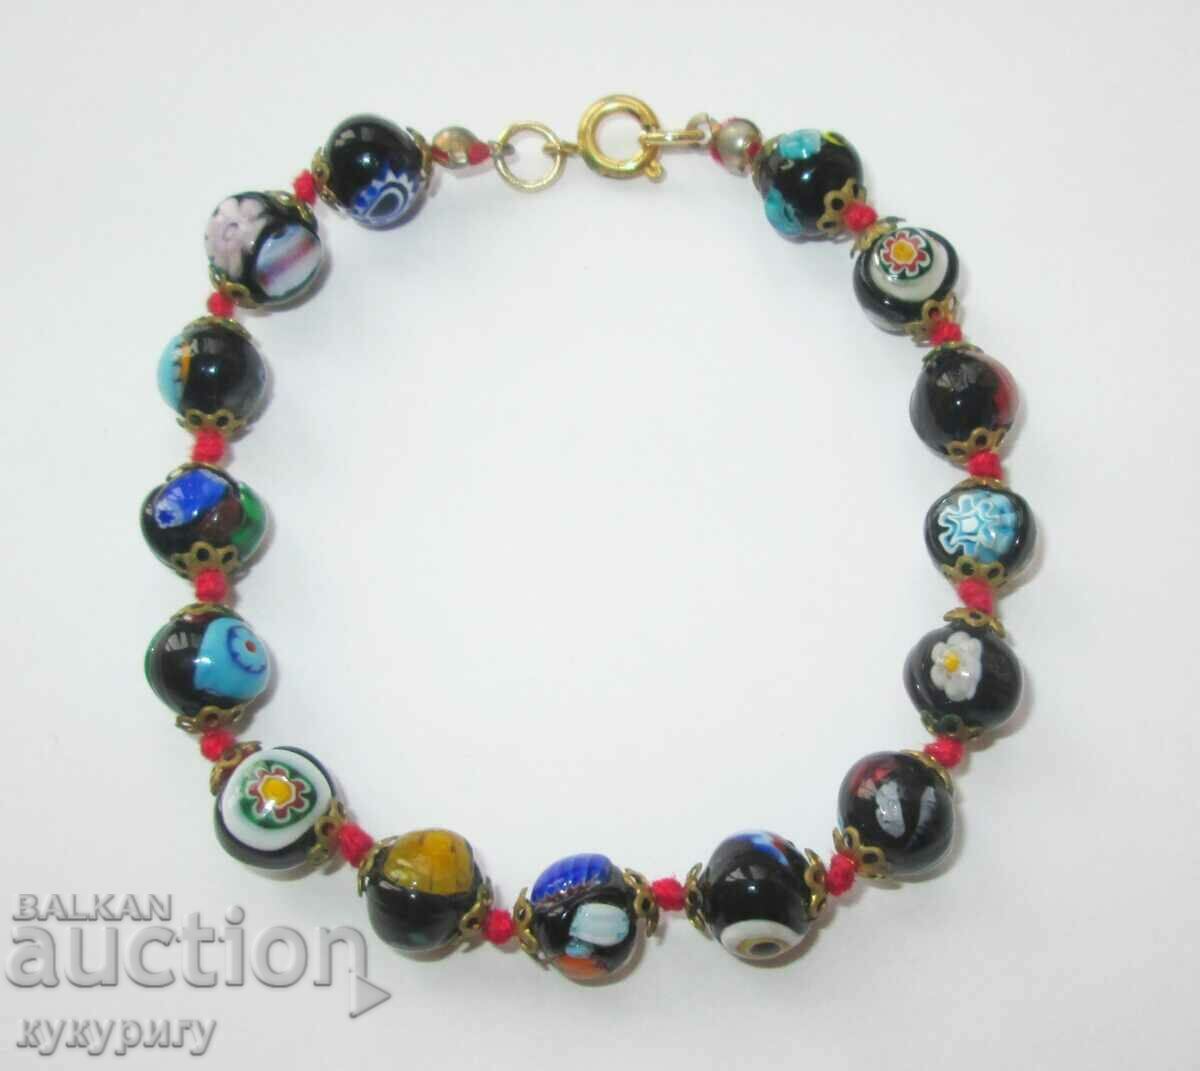 Old Murano glass women's bracelet, hand-crafted